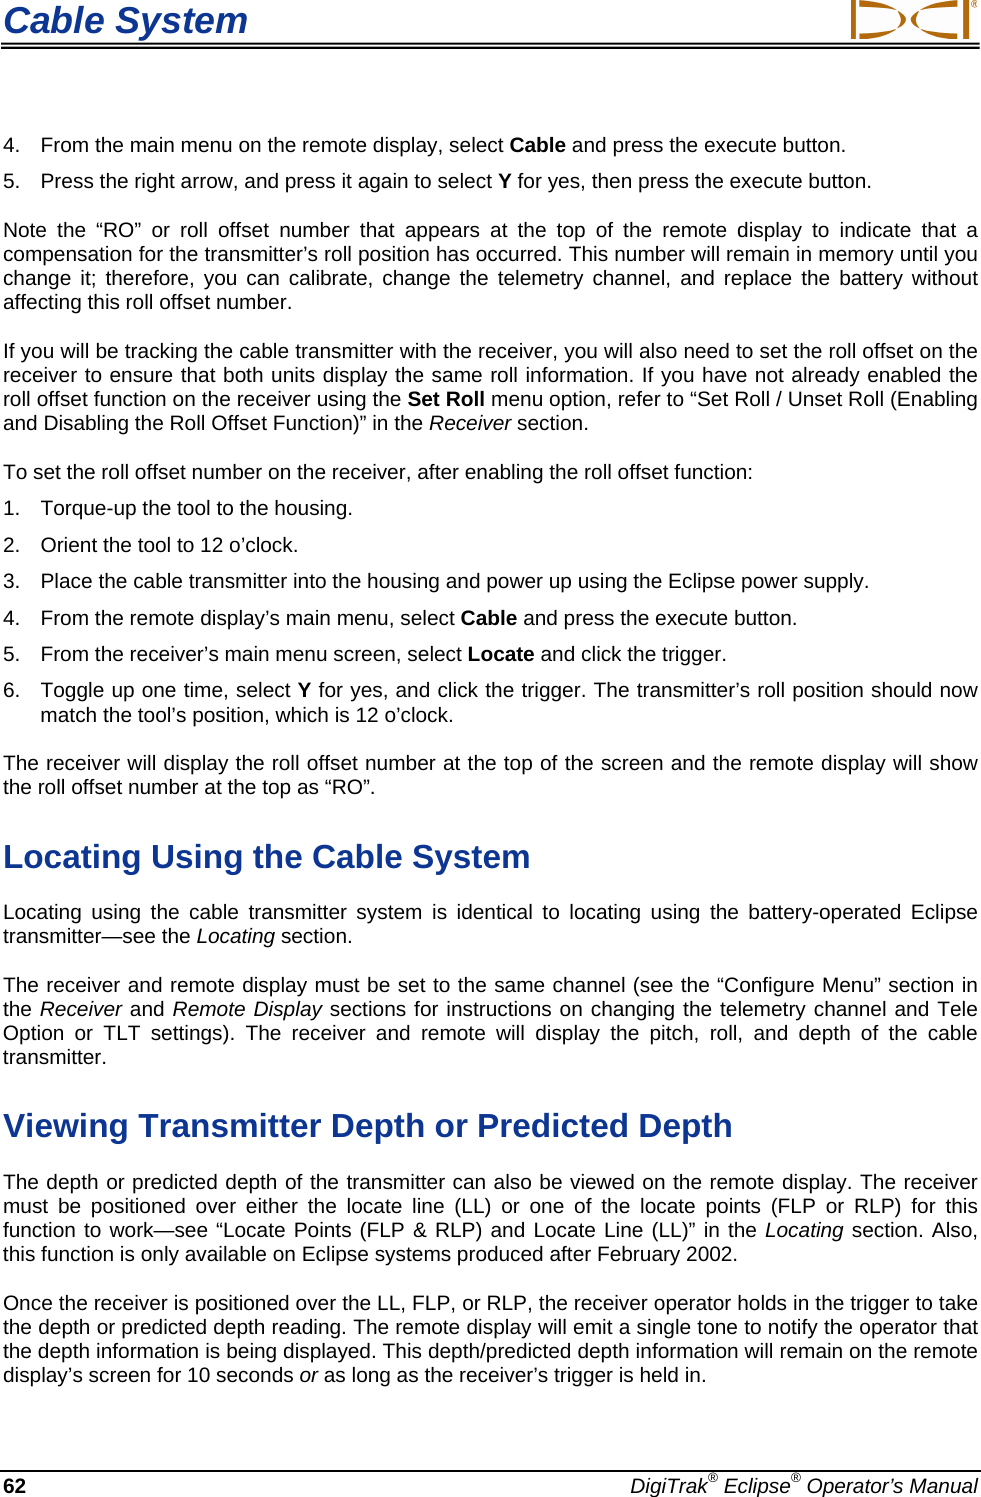 Cable System  4.  From the main menu on the remote display, select Cable and press the execute button. 5.  Press the right arrow, and press it again to select Y for yes, then press the execute button. Note the “RO” or roll offset number that appears at the top of the remote display to indicate that a compensation for the transmitter’s roll position has occurred. This number will remain in memory until you change it; therefore, you can calibrate, change the telemetry channel, and replace the battery without affecting this roll offset number. If you will be tracking the cable transmitter with the receiver, you will also need to set the roll offset on the receiver to ensure that both units display the same roll information. If you have not already enabled the roll offset function on the receiver using the Set Roll menu option, refer to “Set Roll / Unset Roll (Enabling and Disabling the Roll Offset Function)” in the Receiver section. To set the roll offset number on the receiver, after enabling the roll offset function: 1.  Torque-up the tool to the housing. 2.  Orient the tool to 12 o’clock. 3.  Place the cable transmitter into the housing and power up using the Eclipse power supply. 4.  From the remote display’s main menu, select Cable and press the execute button. 5.  From the receiver’s main menu screen, select Locate and click the trigger. 6.  Toggle up one time, select Y for yes, and click the trigger. The transmitter’s roll position should now match the tool’s position, which is 12 o’clock. The receiver will display the roll offset number at the top of the screen and the remote display will show the roll offset number at the top as “RO”. Locating Using the Cable System Locating using the cable transmitter system is identical to locating using the battery-operated Eclipse transmitter—see the Locating section. The receiver and remote display must be set to the same channel (see the “Configure Menu” section in the Receiver and Remote Display sections for instructions on changing the telemetry channel and Tele Option or TLT settings). The receiver and remote will display the pitch, roll, and depth of the cable transmitter.  Viewing Transmitter Depth or Predicted Depth The depth or predicted depth of the transmitter can also be viewed on the remote display. The receiver must be positioned over either the locate line (LL) or one of the locate points (FLP or RLP) for this function to work—see “Locate Points (FLP &amp; RLP) and Locate Line (LL)” in the Locating section. Also, this function is only available on Eclipse systems produced after February 2002. Once the receiver is positioned over the LL, FLP, or RLP, the receiver operator holds in the trigger to take the depth or predicted depth reading. The remote display will emit a single tone to notify the operator that the depth information is being displayed. This depth/predicted depth information will remain on the remote display’s screen for 10 seconds or as long as the receiver’s trigger is held in.  62  DigiTrak® Eclipse® Operator’s Manual 